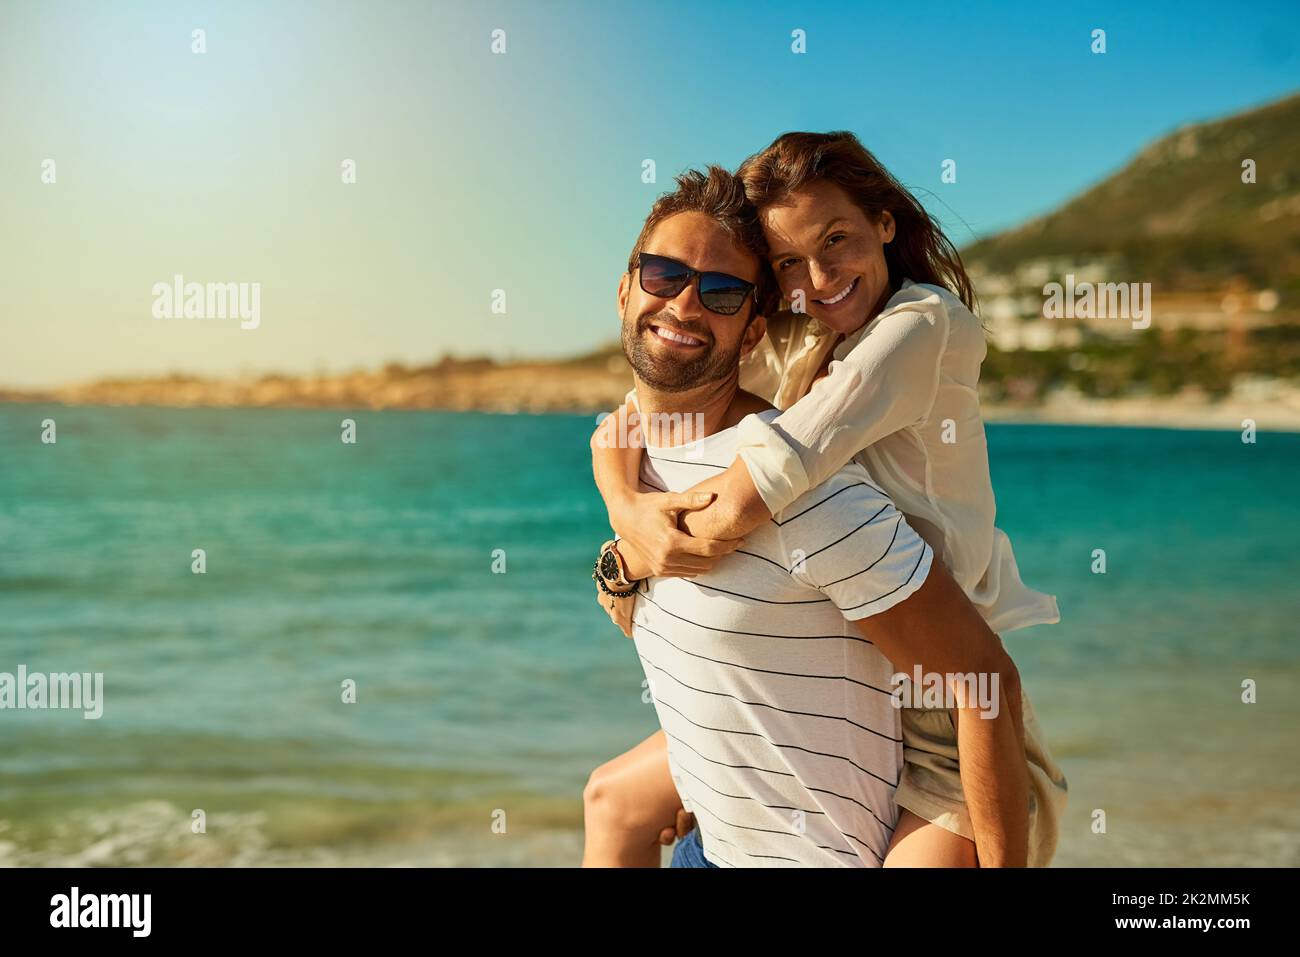 The perfect day for some fun and romance. Shot of a happy young couple enjoying a piggyback ride at the beach. Stock Photo